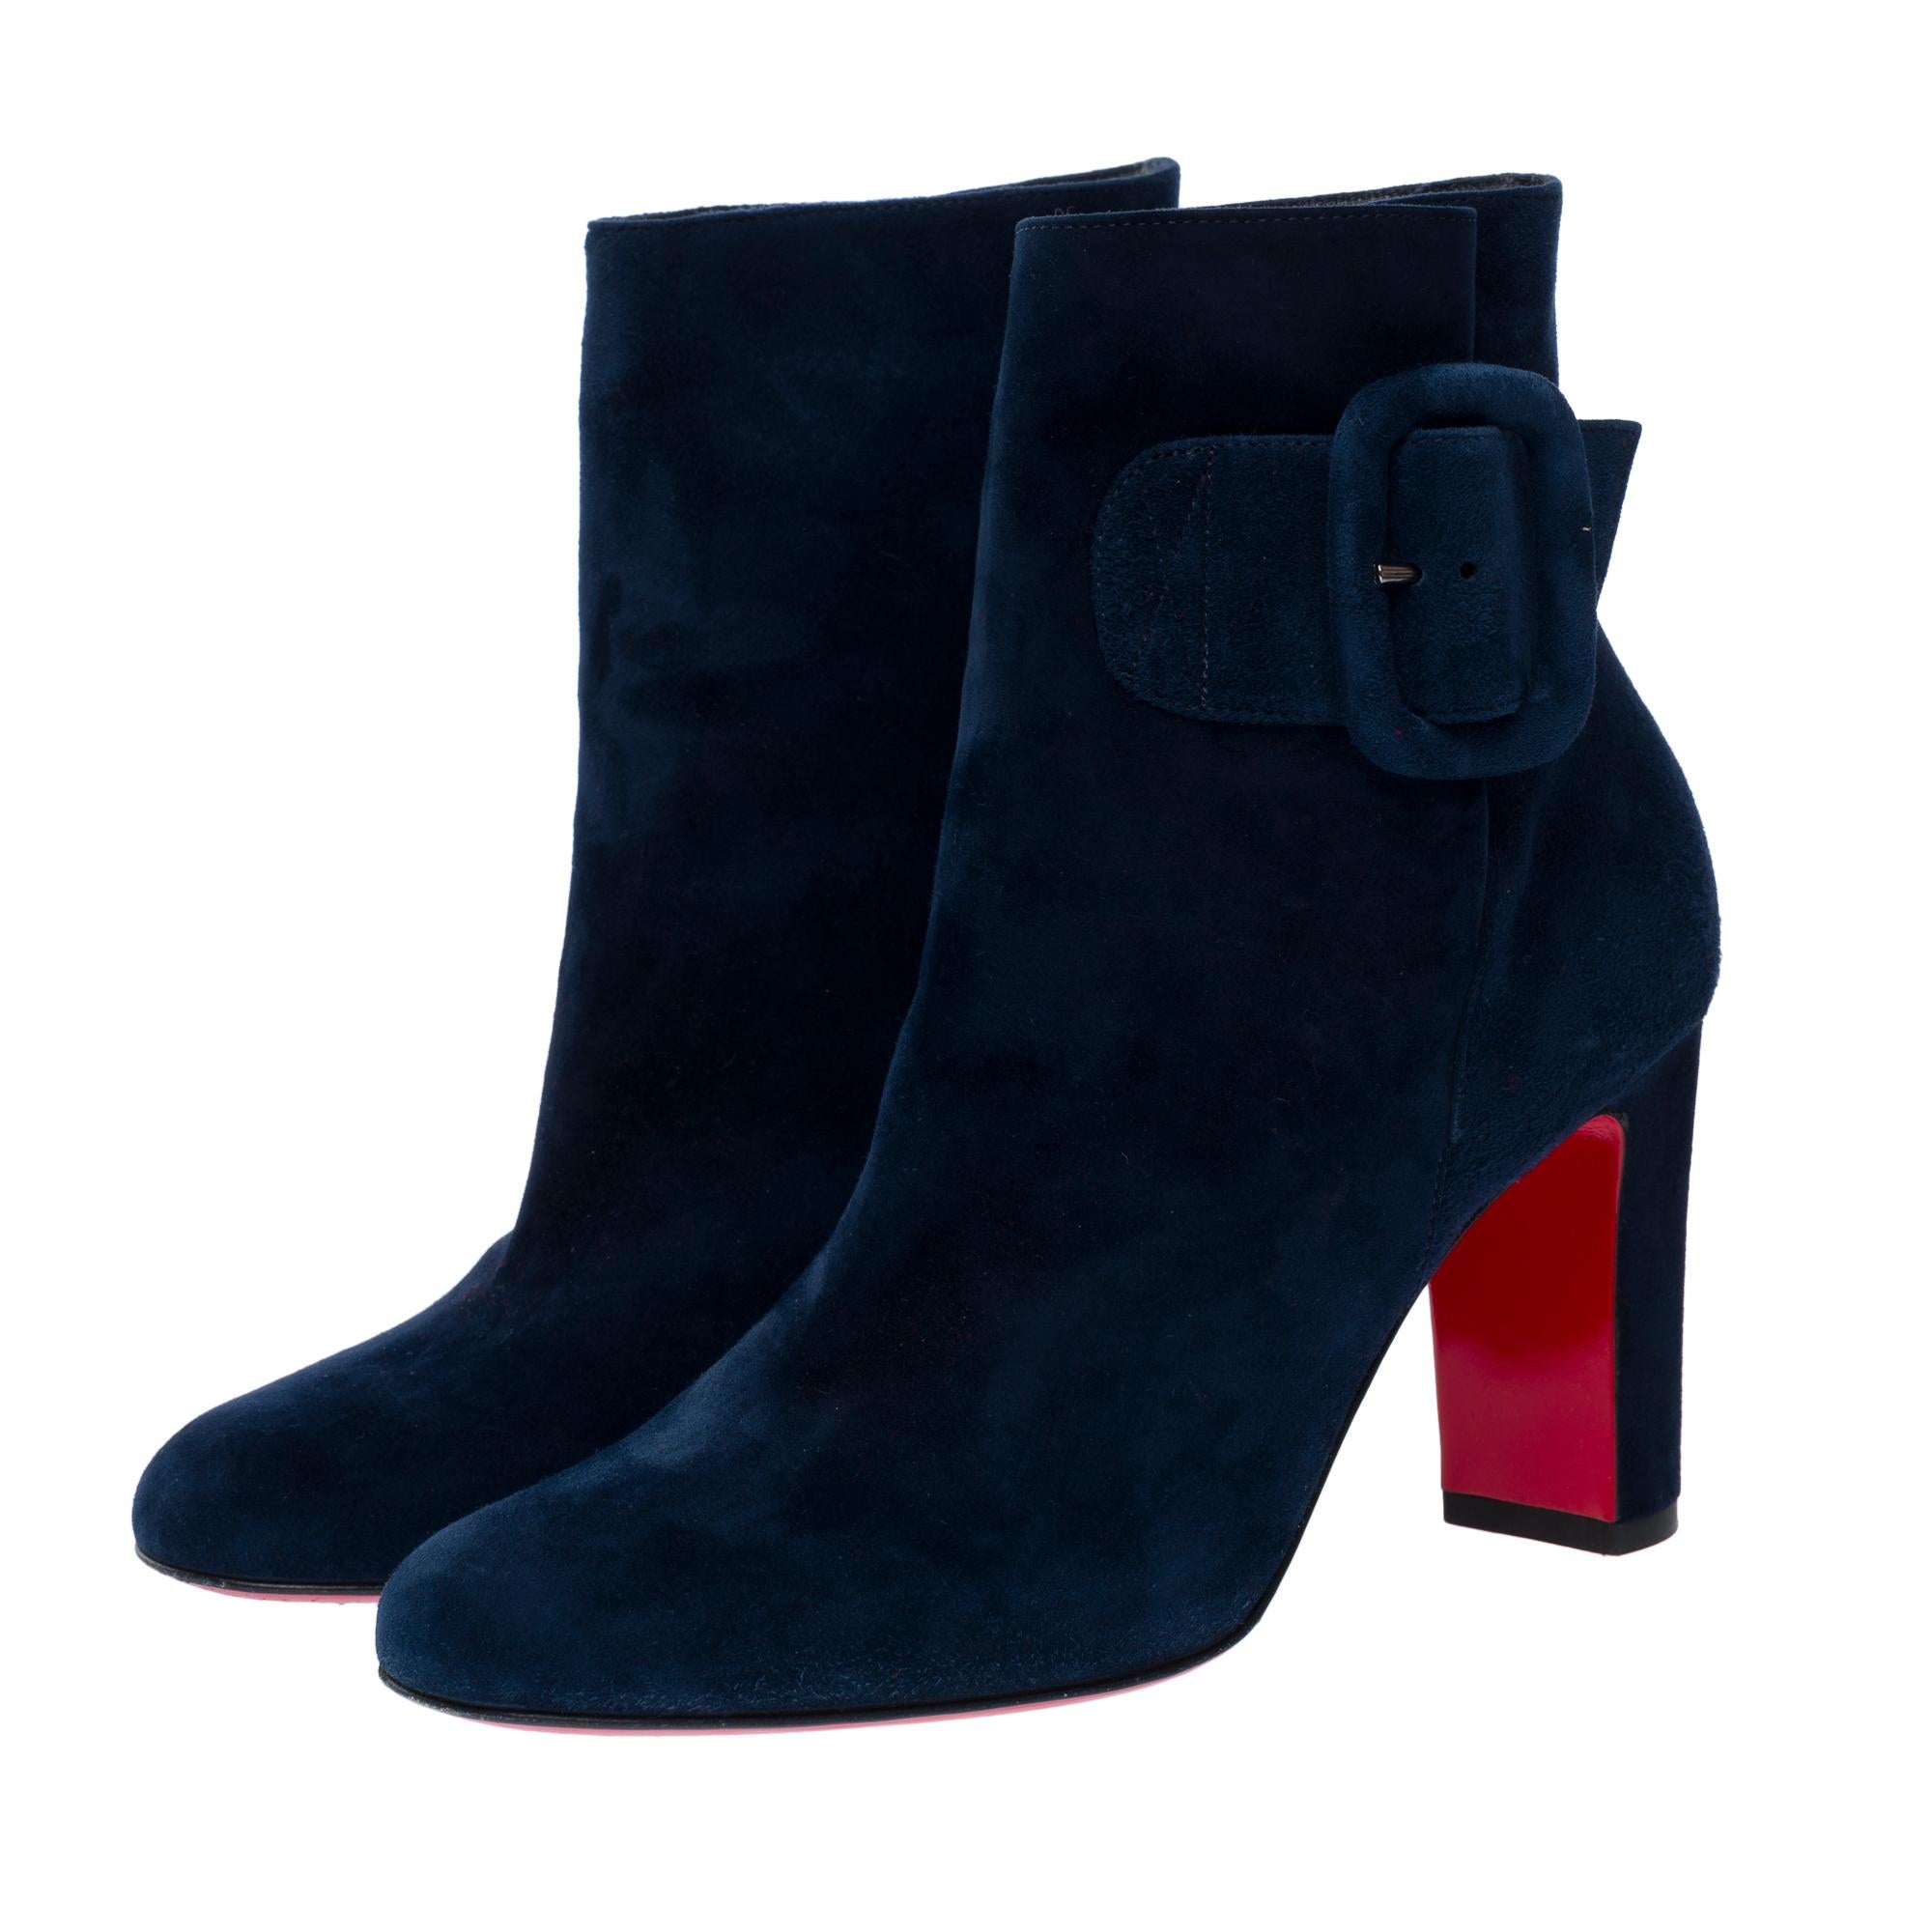 Christian​ ​Louboutin​ ​ankleboot​ ​with​ ​platform​ ​and​ ​trottinette​ ​buckle​ ​in​ ​blue​ ​suede
Signature:​ ​